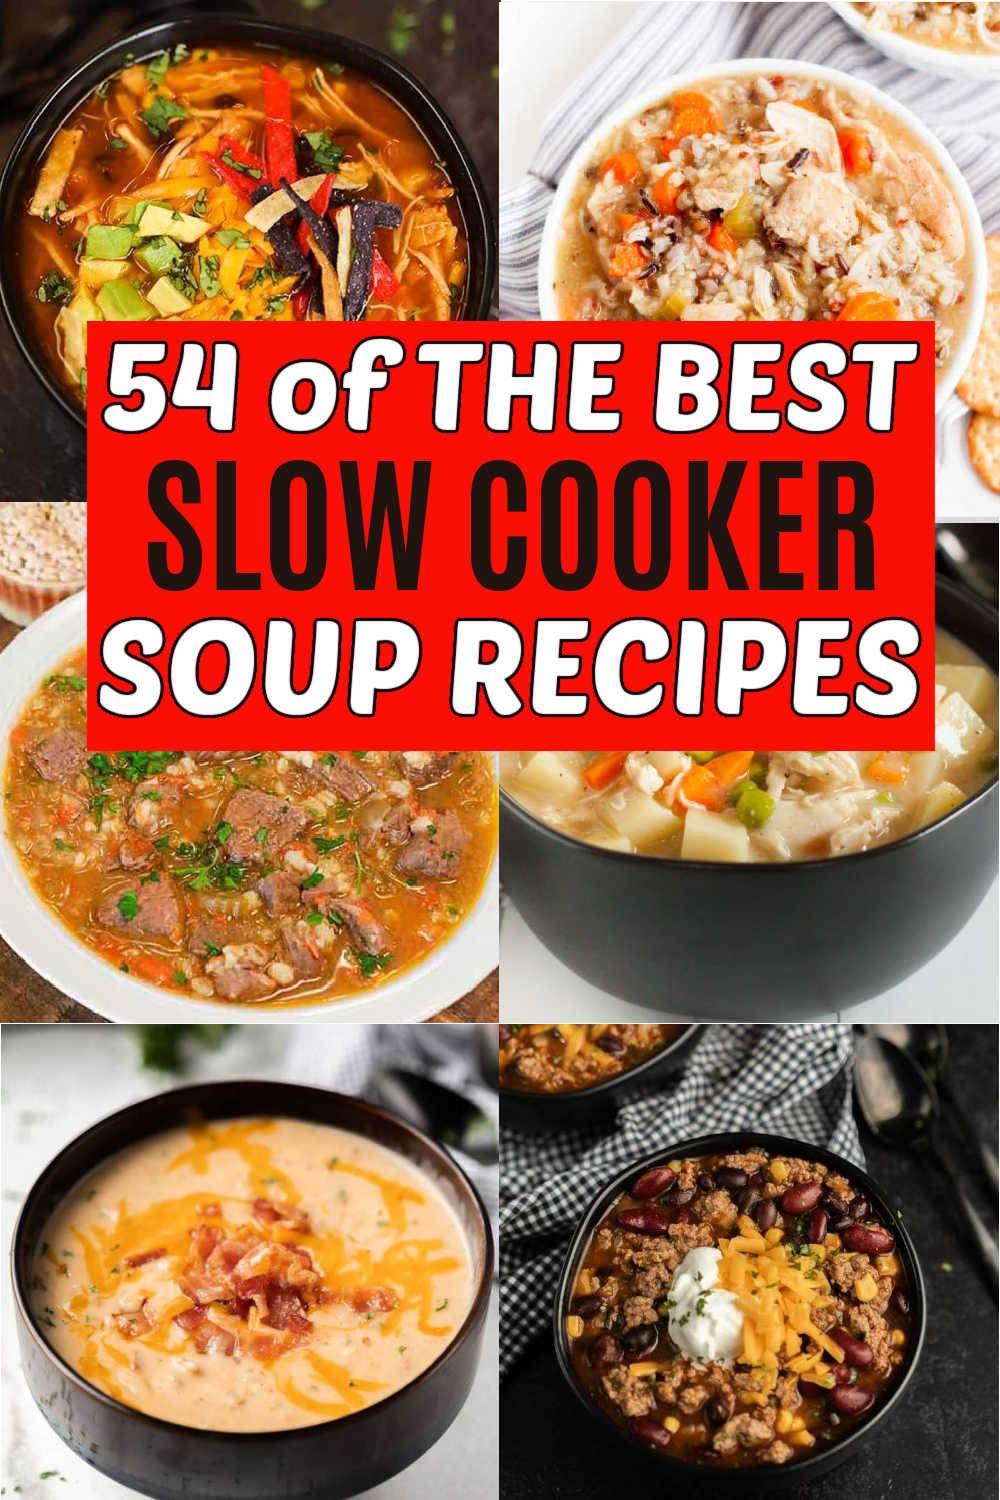 We have gathered 54 of our favorite Crock Pot Soup Recipes. Cooking soup is the best comfort food and always a family favorite. These recipes are easy to make and delicious too. #eatingonadime #souprecipes #slowcooker